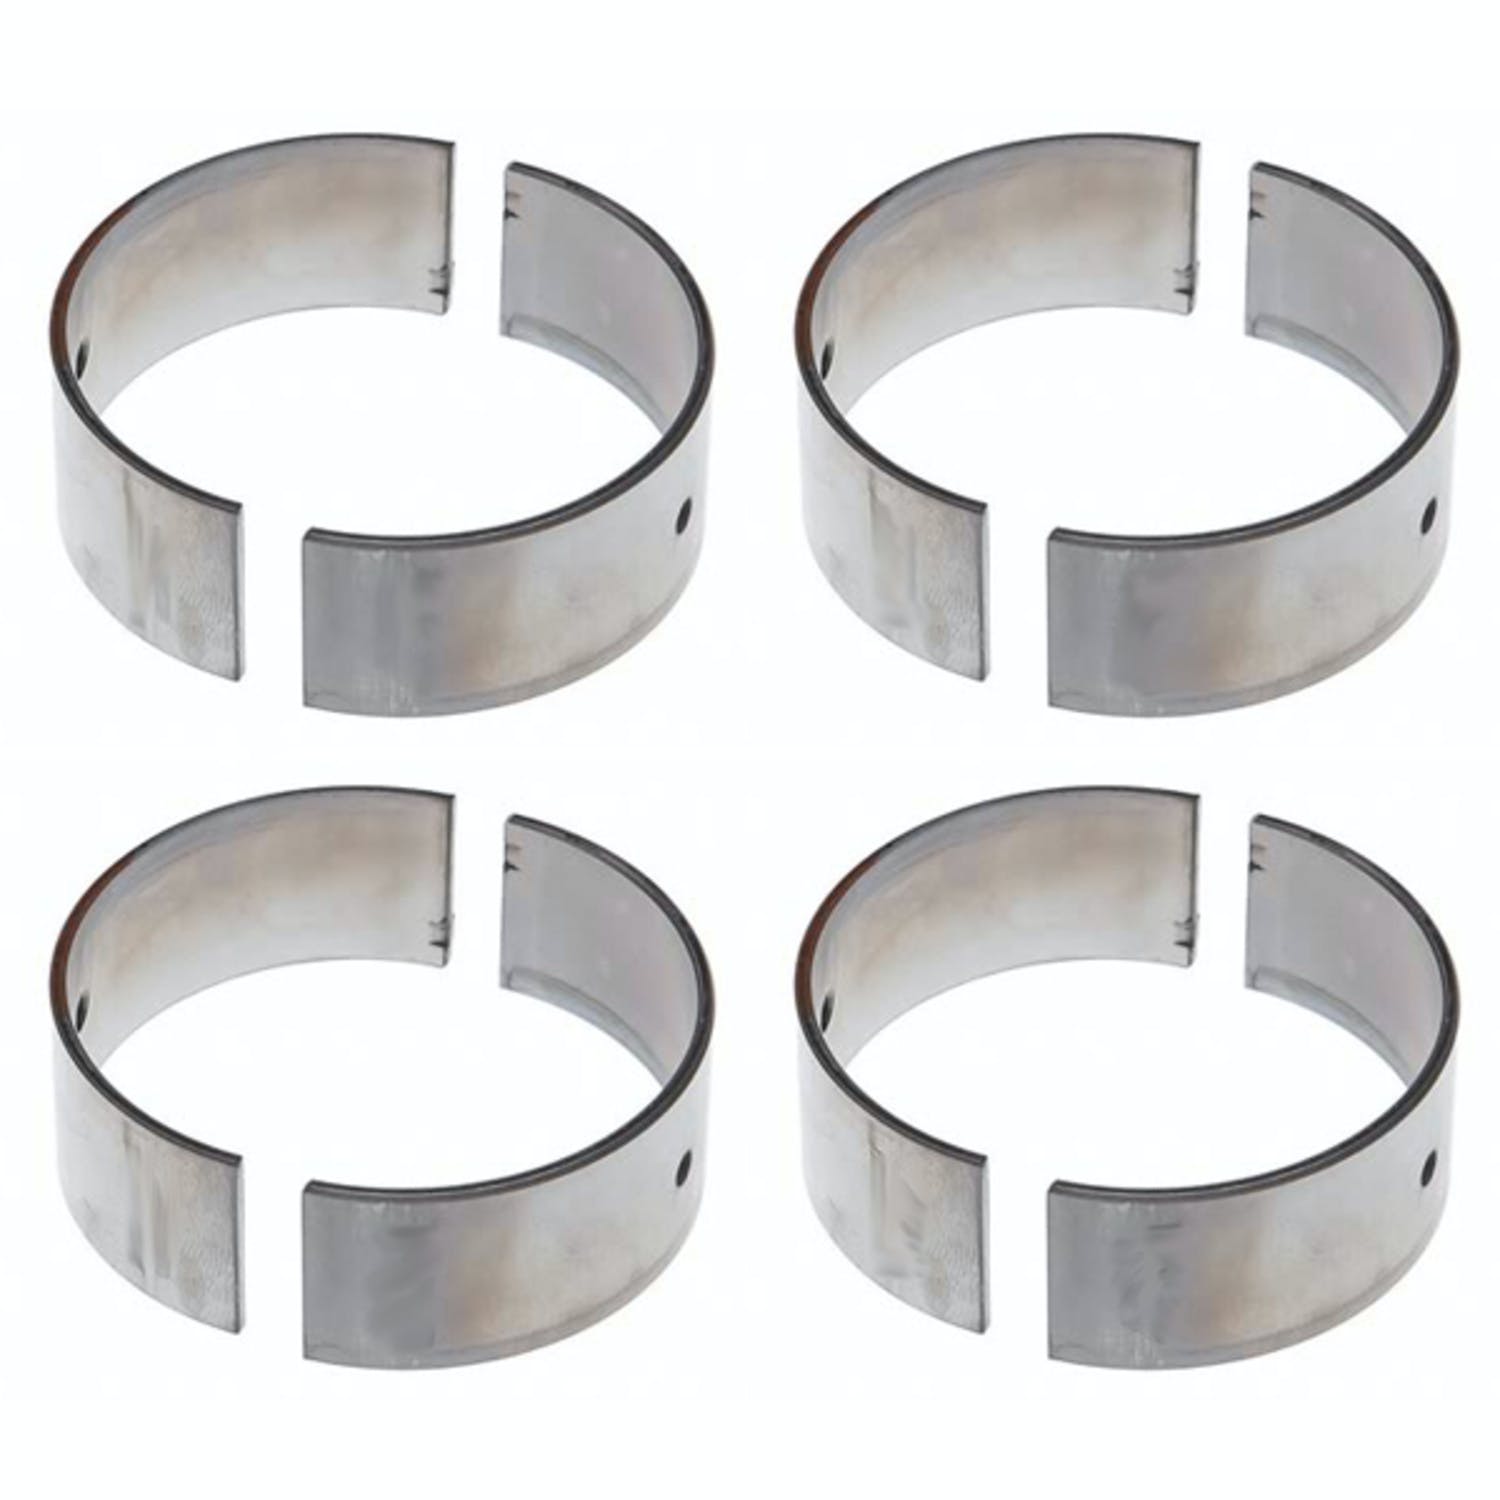 Omix-ADA 17467.62 Connecting Rod Bearing